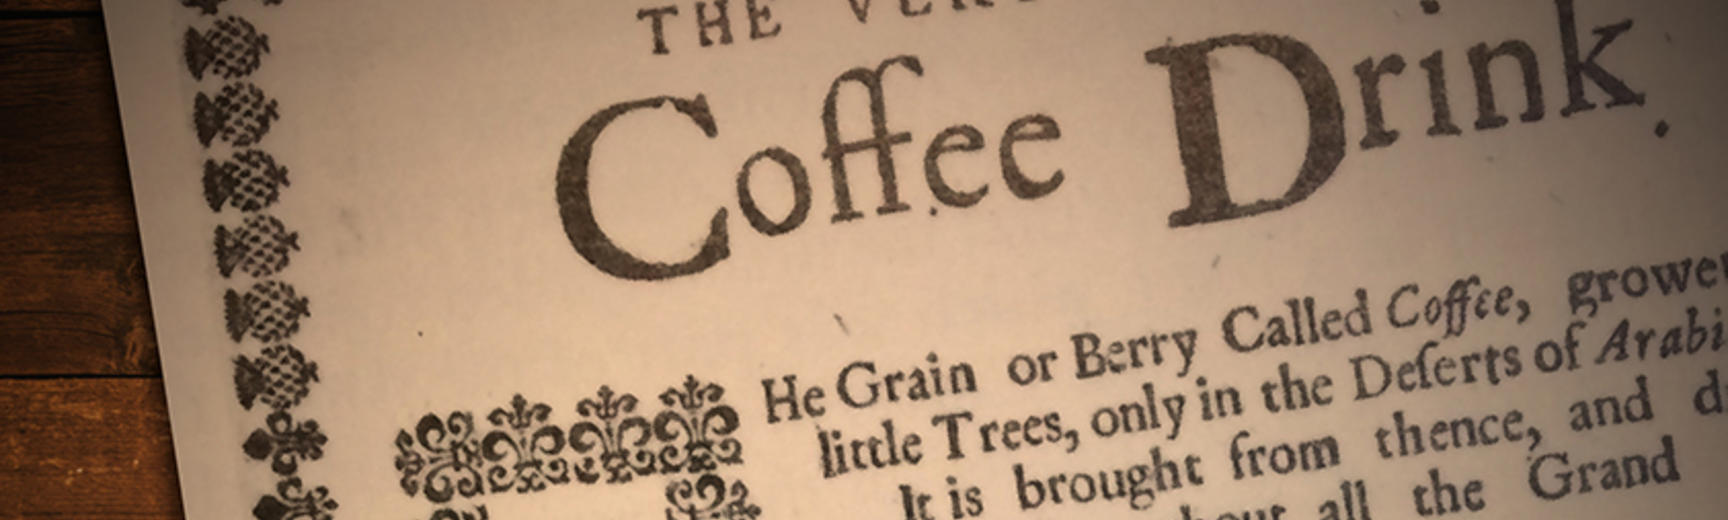 Two copper coins on top of a page titled The Vertue of the Coffee Drink